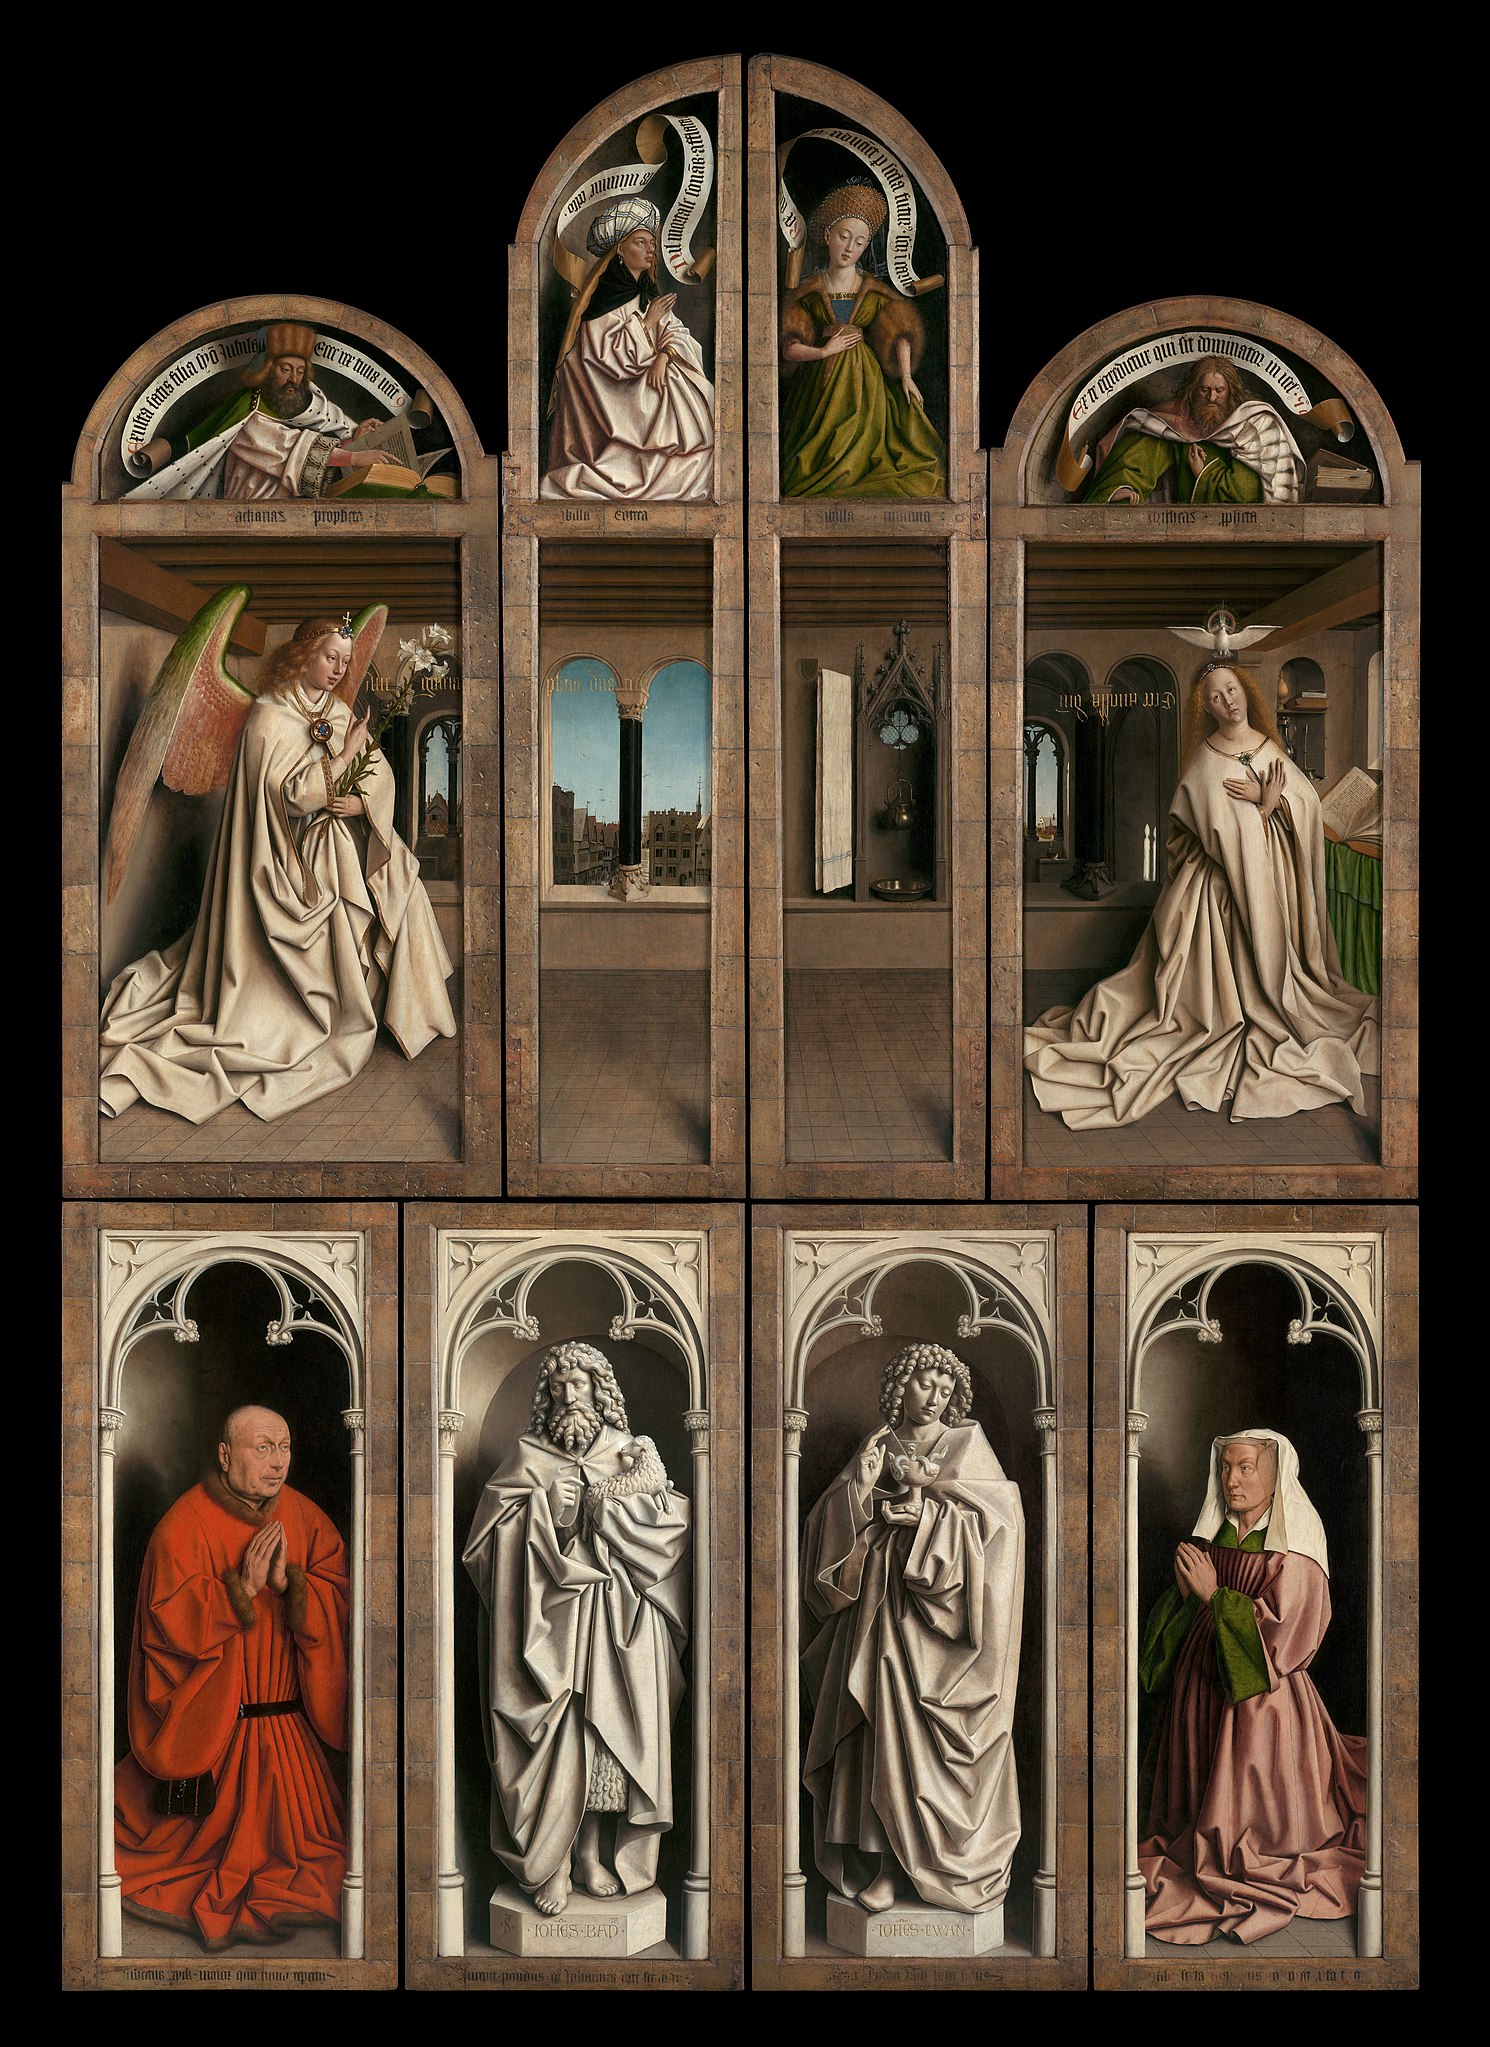 Jan and Hubert van Eyck, Ghent Altarpiece (also known as The Adoration of the Mystic Lamb), 1432, tempera and oil on panel, 147-5/8  x 102 -3/8 inches (closed, after restoration) (Cathedral of Saint Bavo, Ghent, Belgium; photo: Madatoille, CC0)